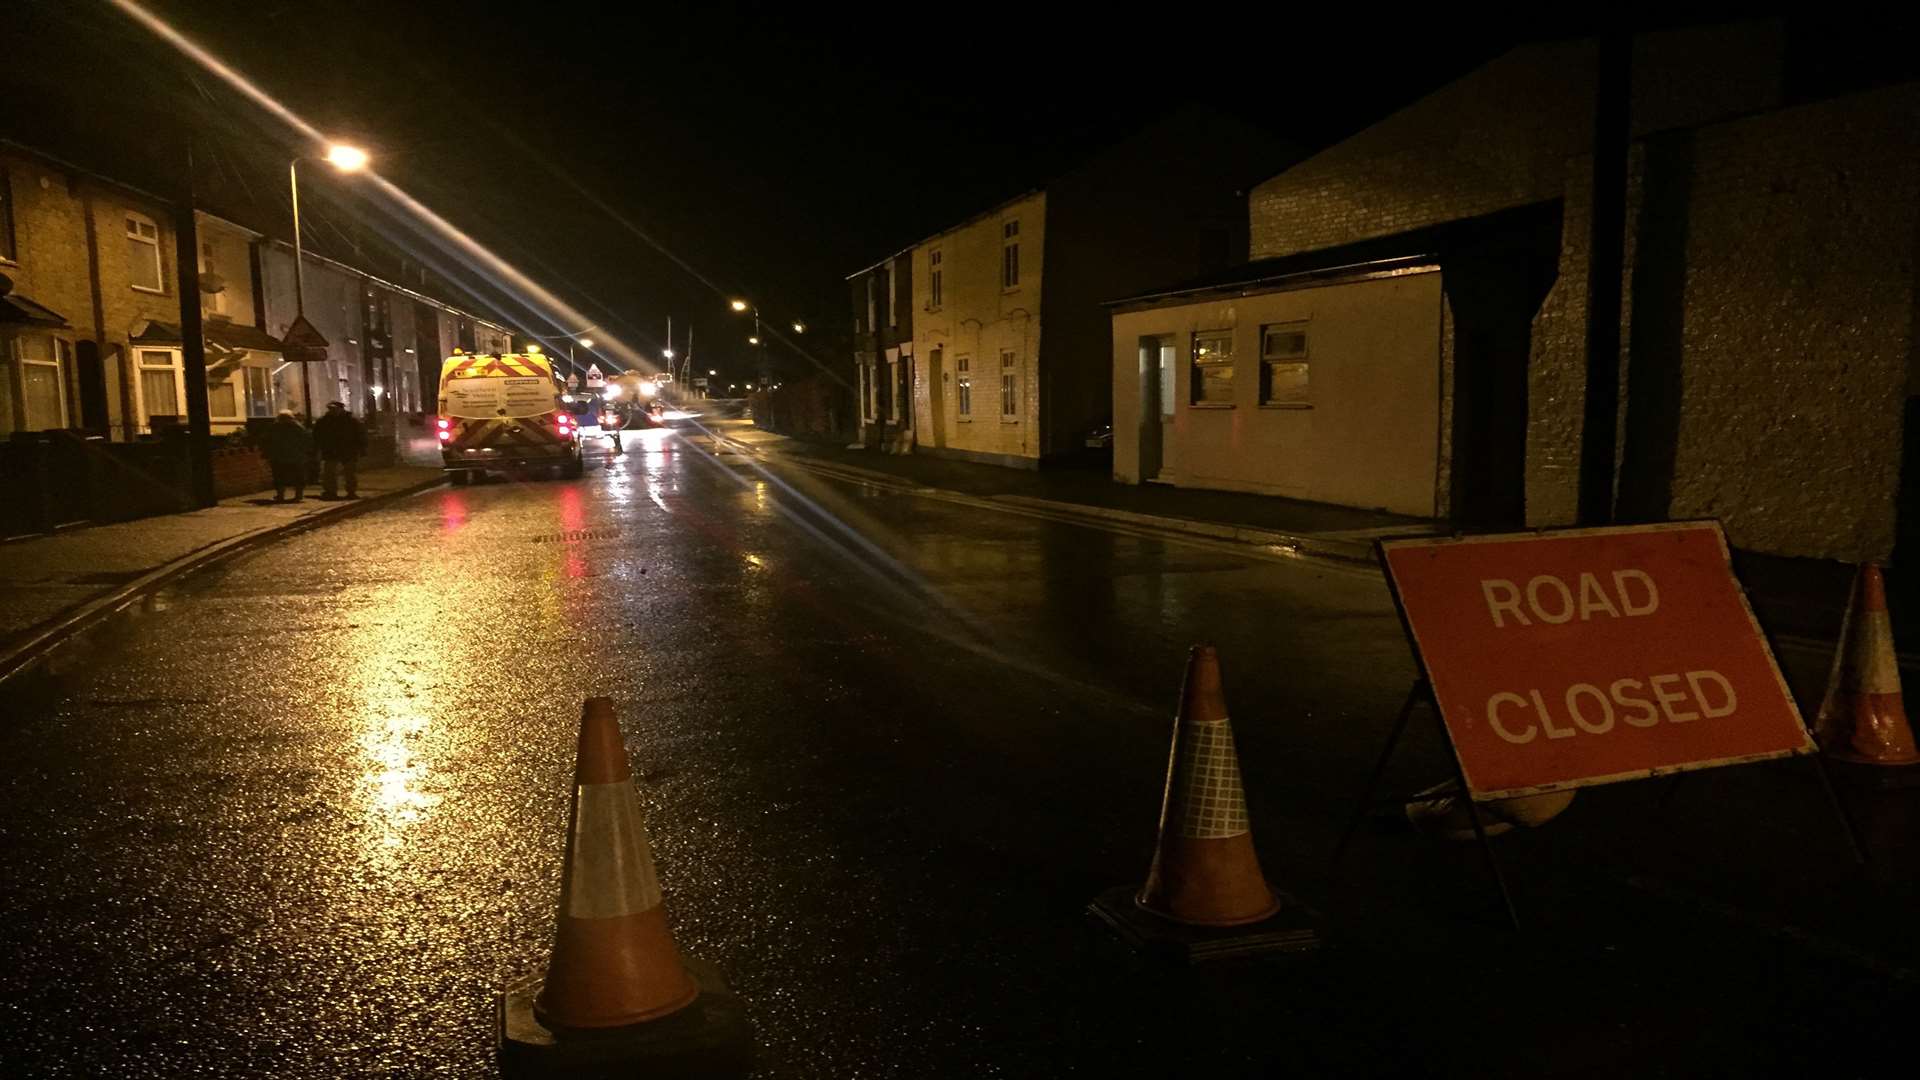 Albert Road was closed last night as part of Southern Water's emergency action plan